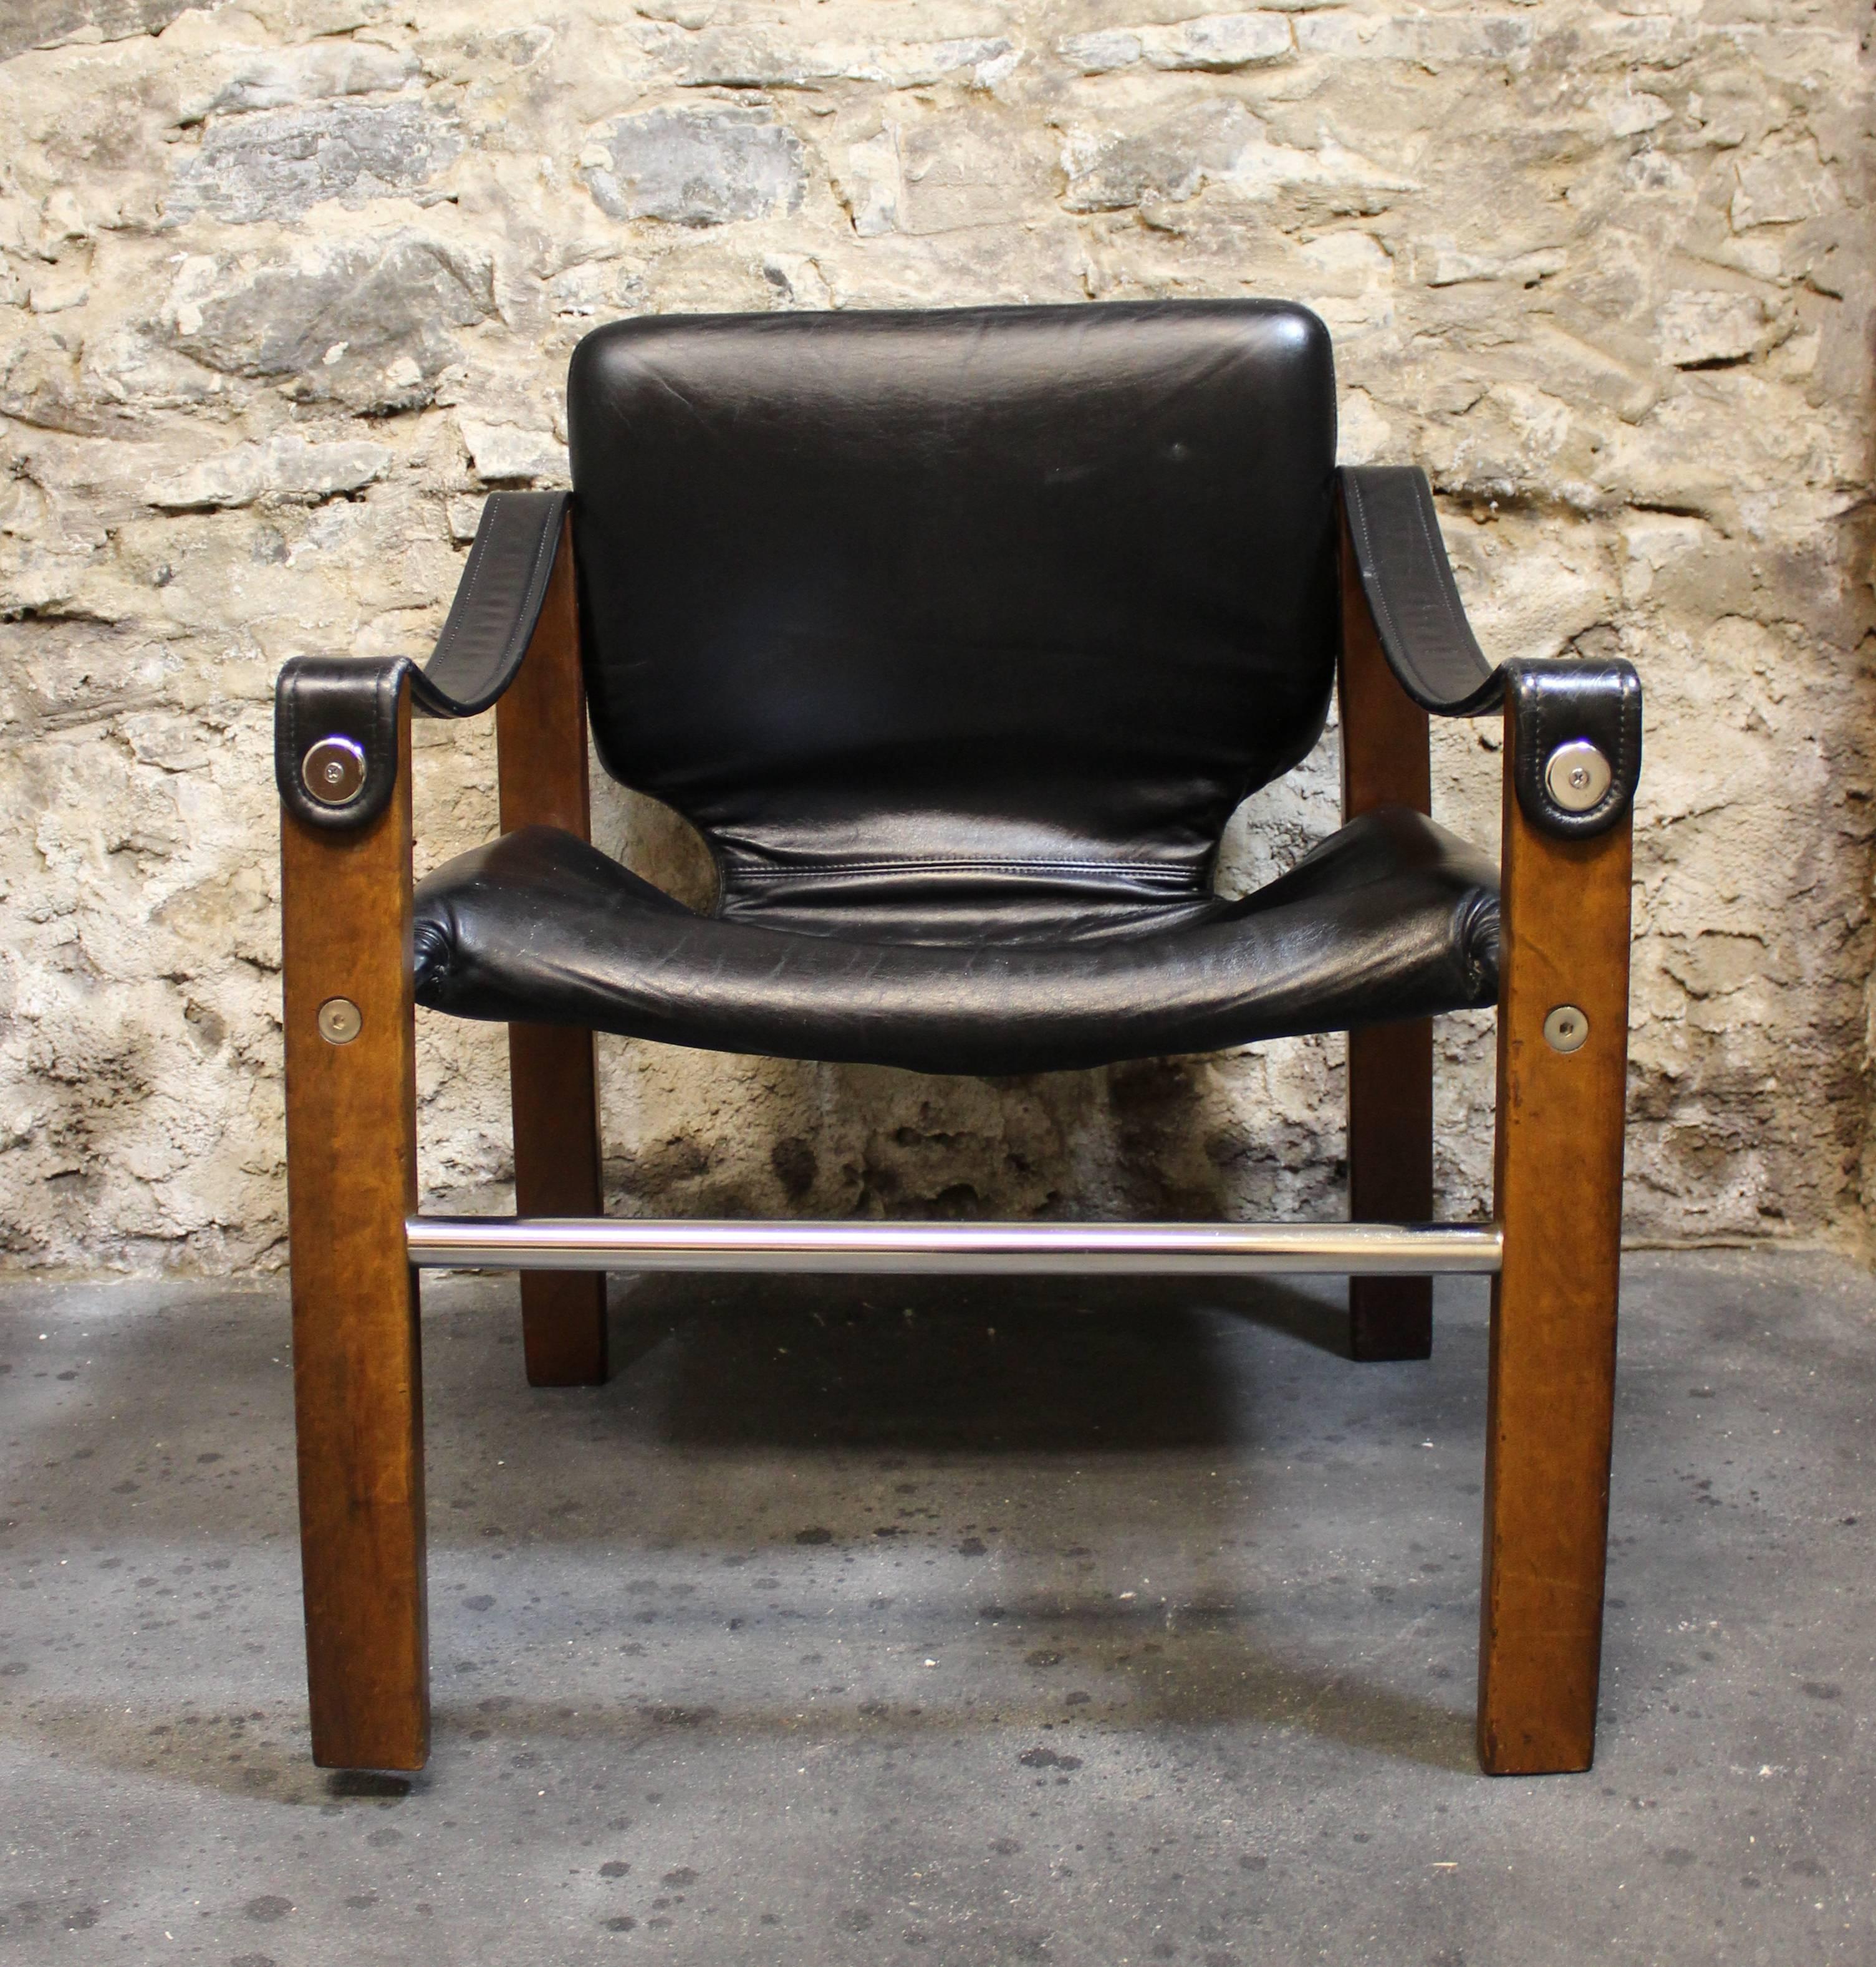 Safari chair by Maurice Burke.

Done in black leather upholstery.